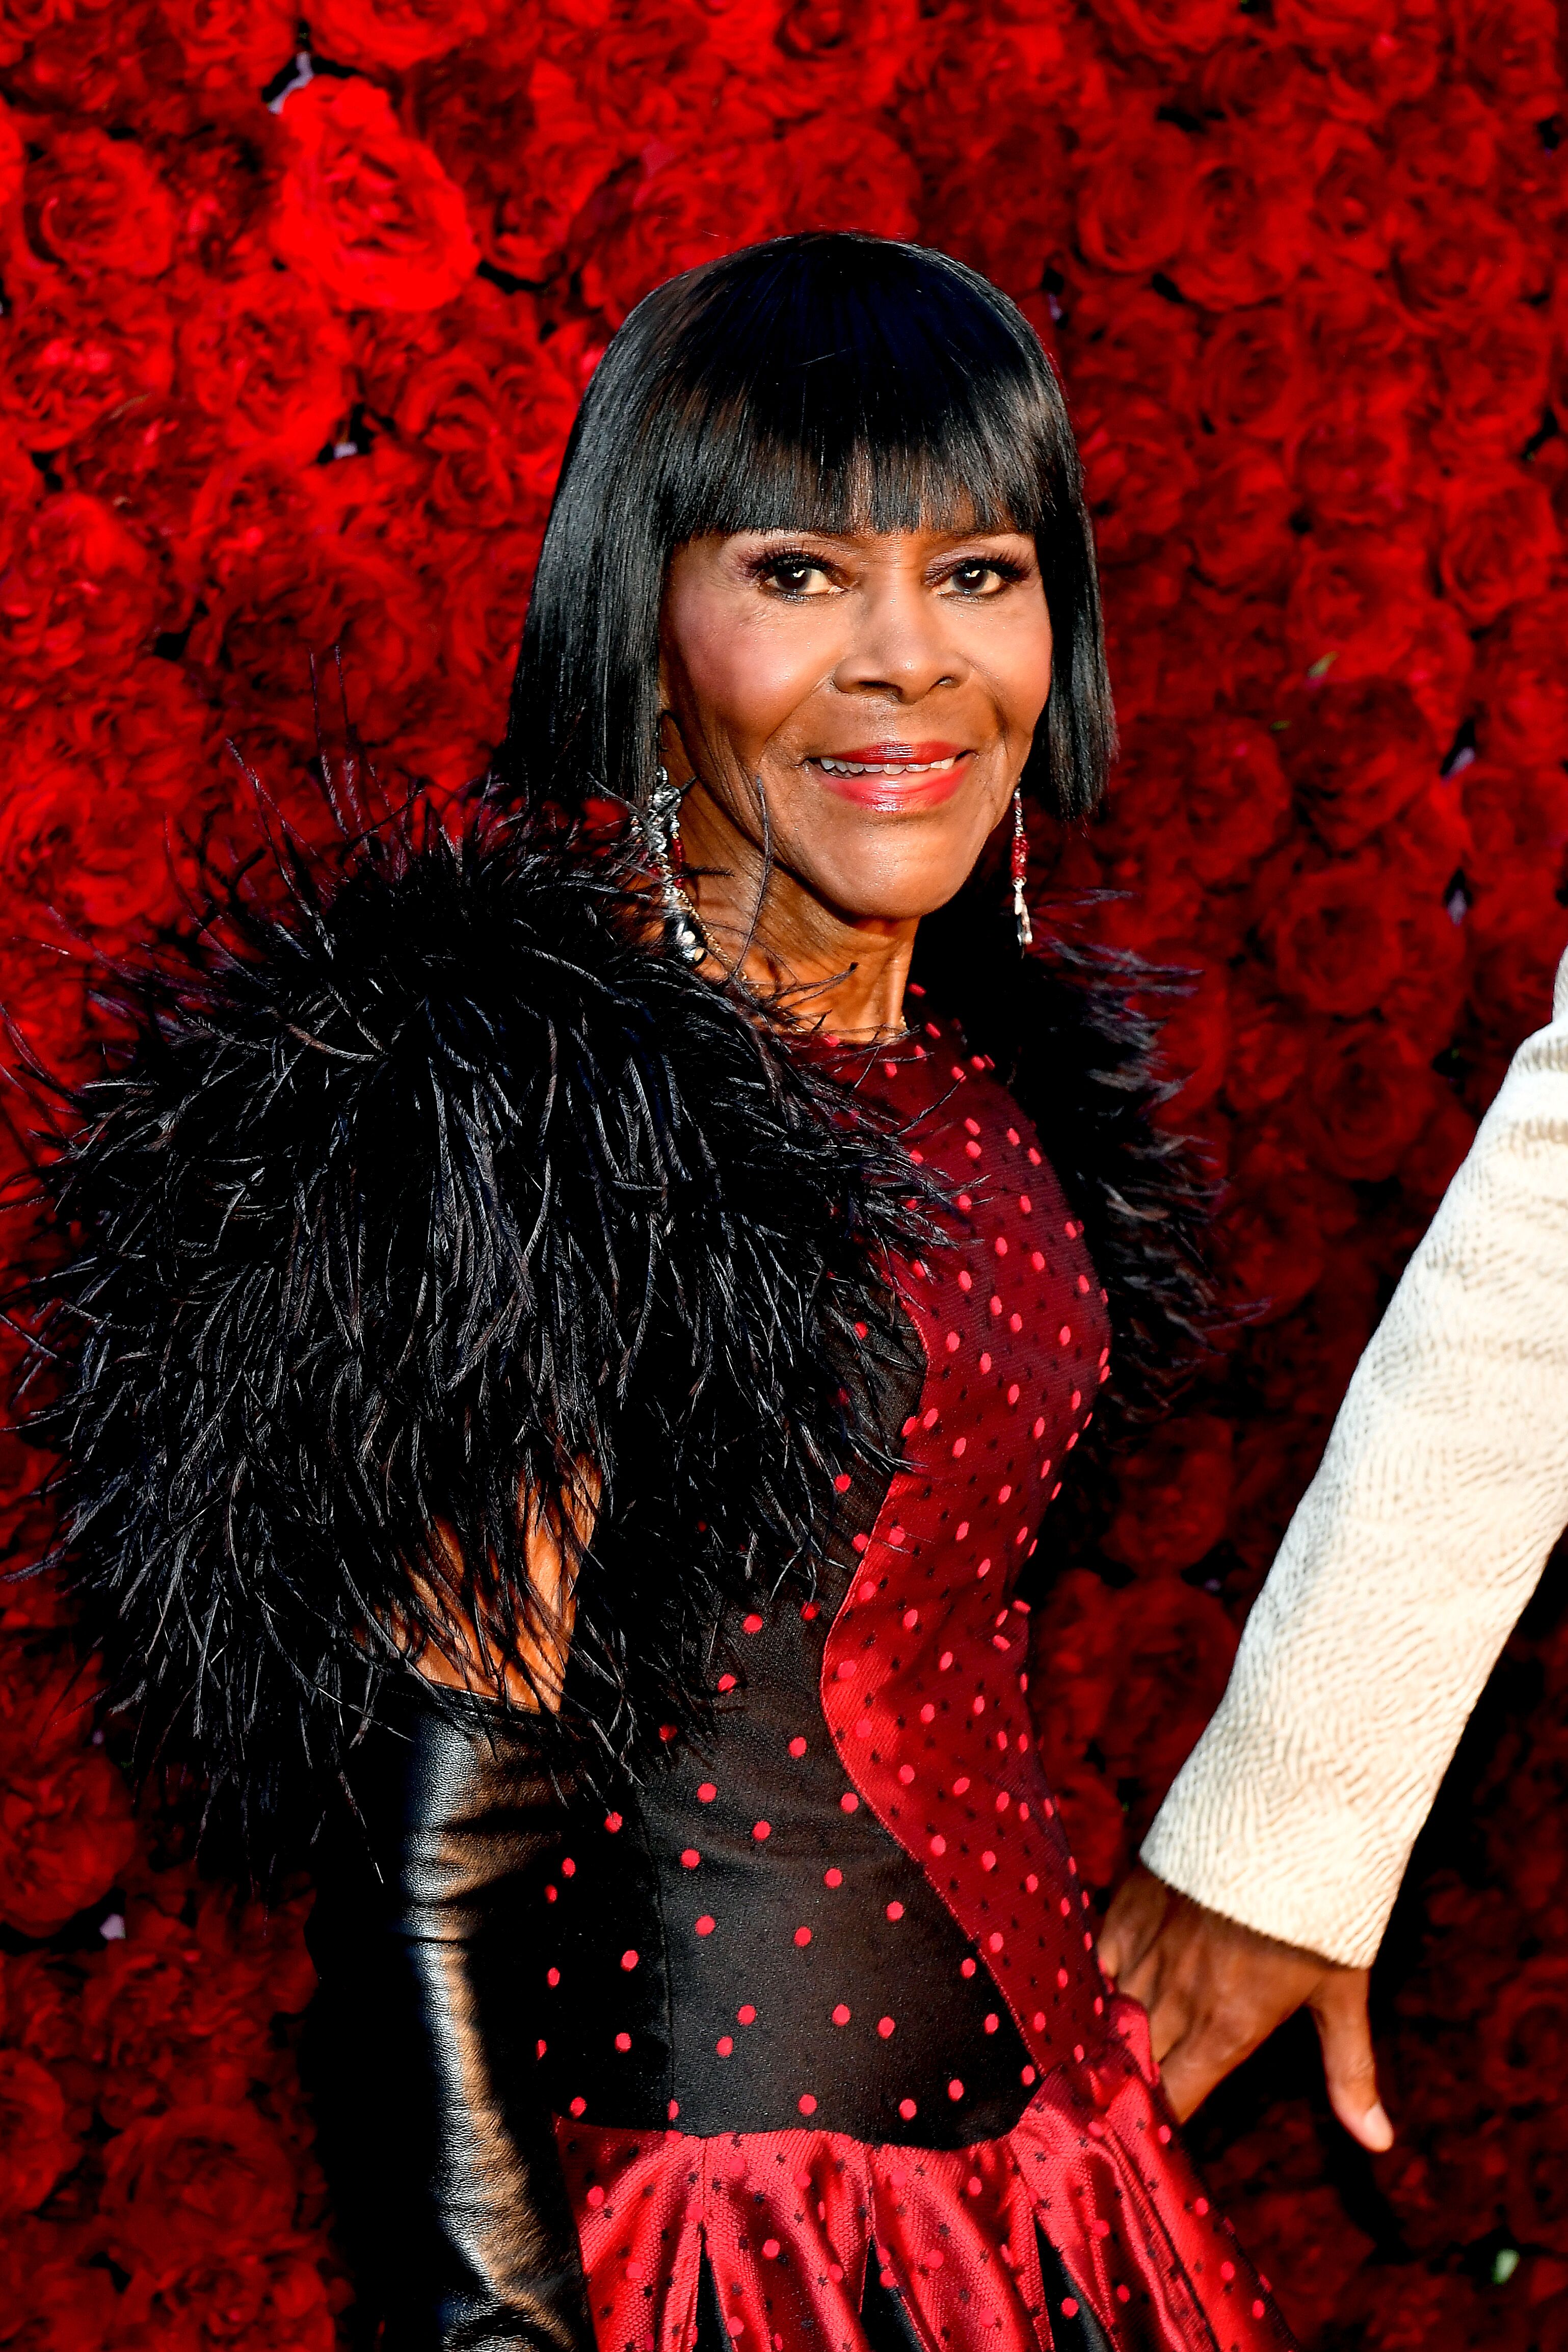 Cicely Tyson at the Grand Opening Gala of the Tyler Perry Studios on October 5, 2019 in Atlanta, Georgia | Photo: Getty Images